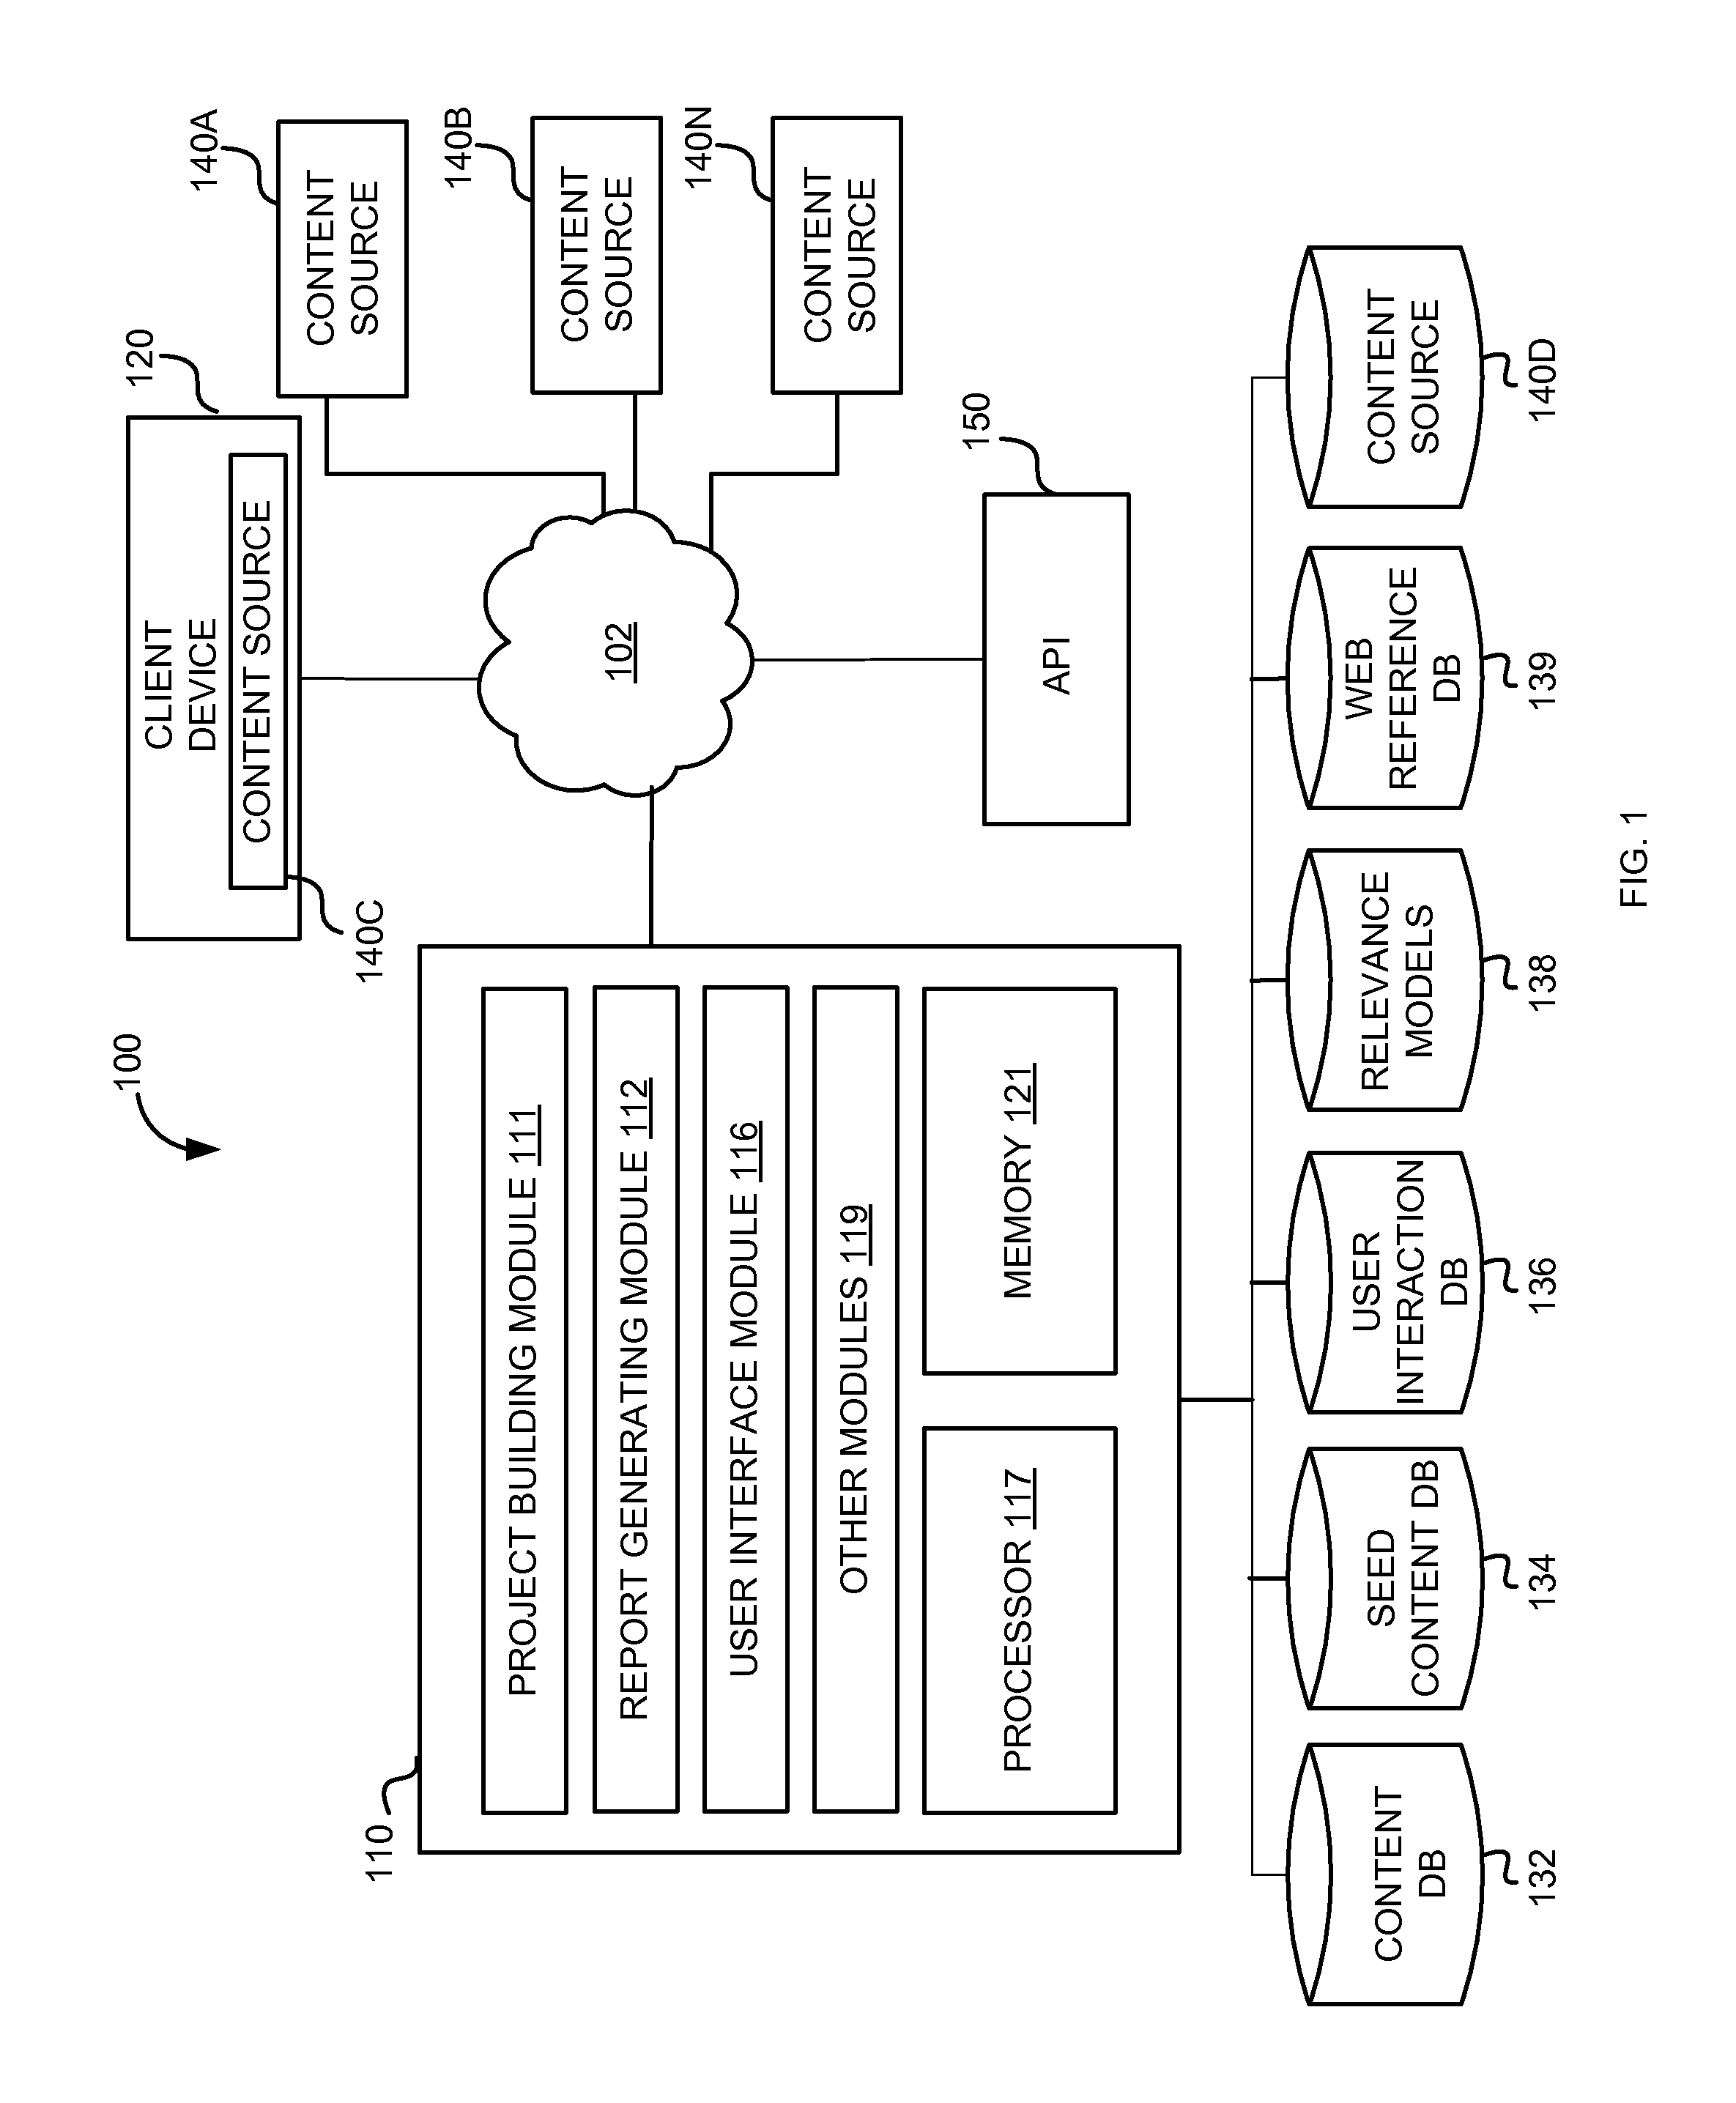 System and method for providing a semi-automated research tool